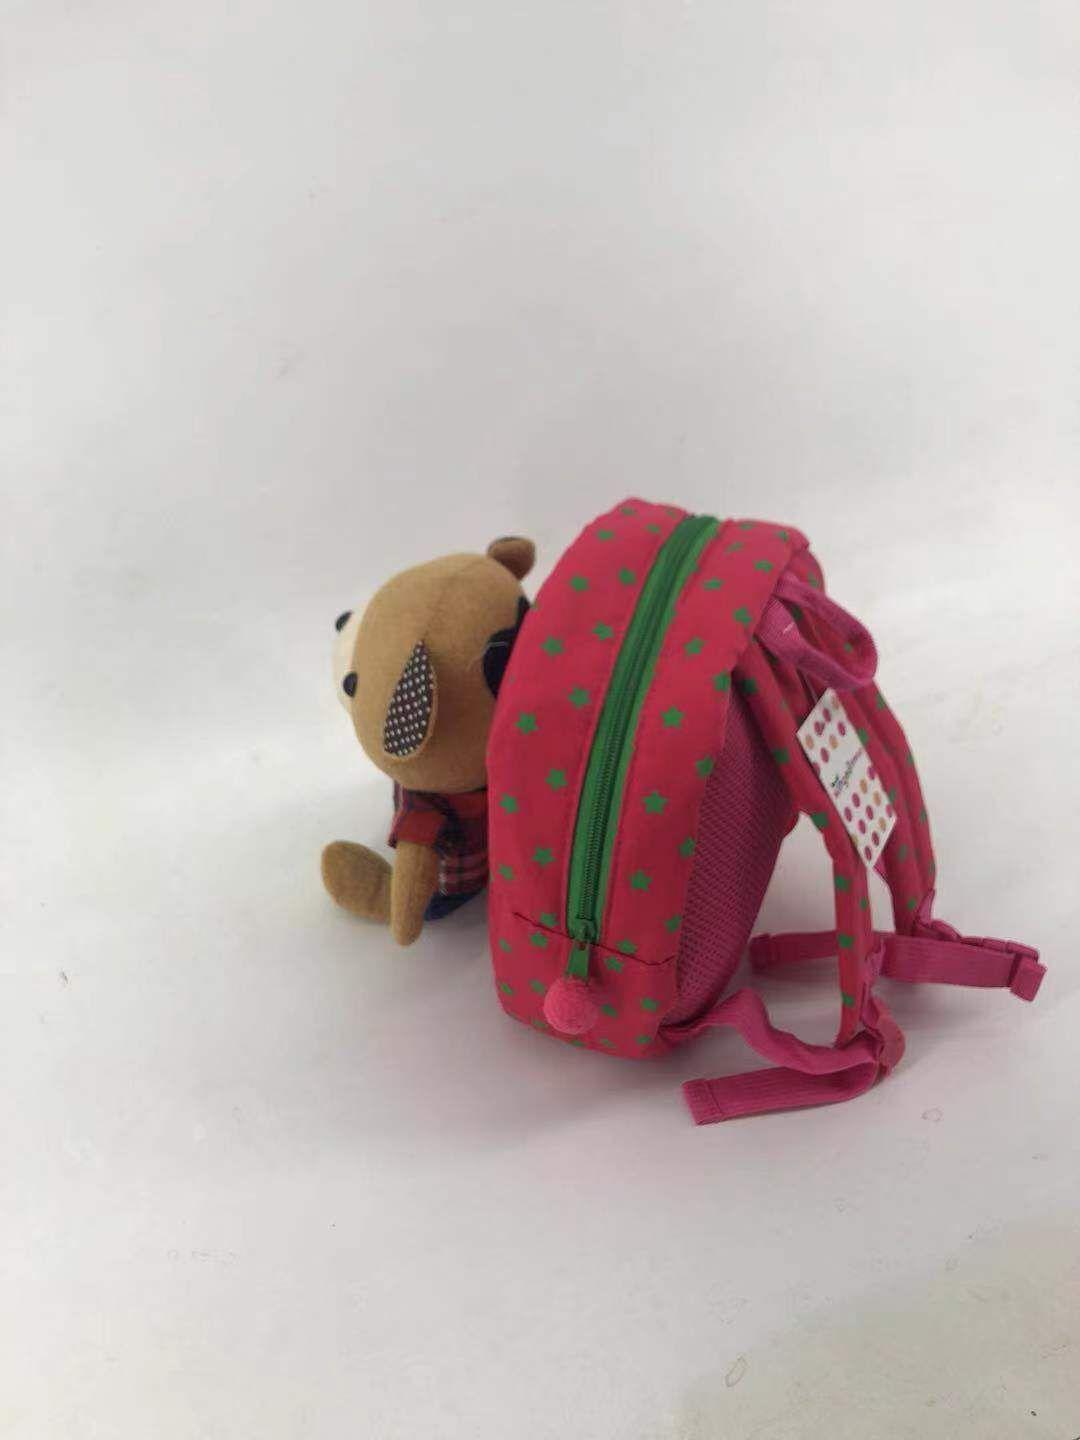 Rucksack with a safety leash - pink